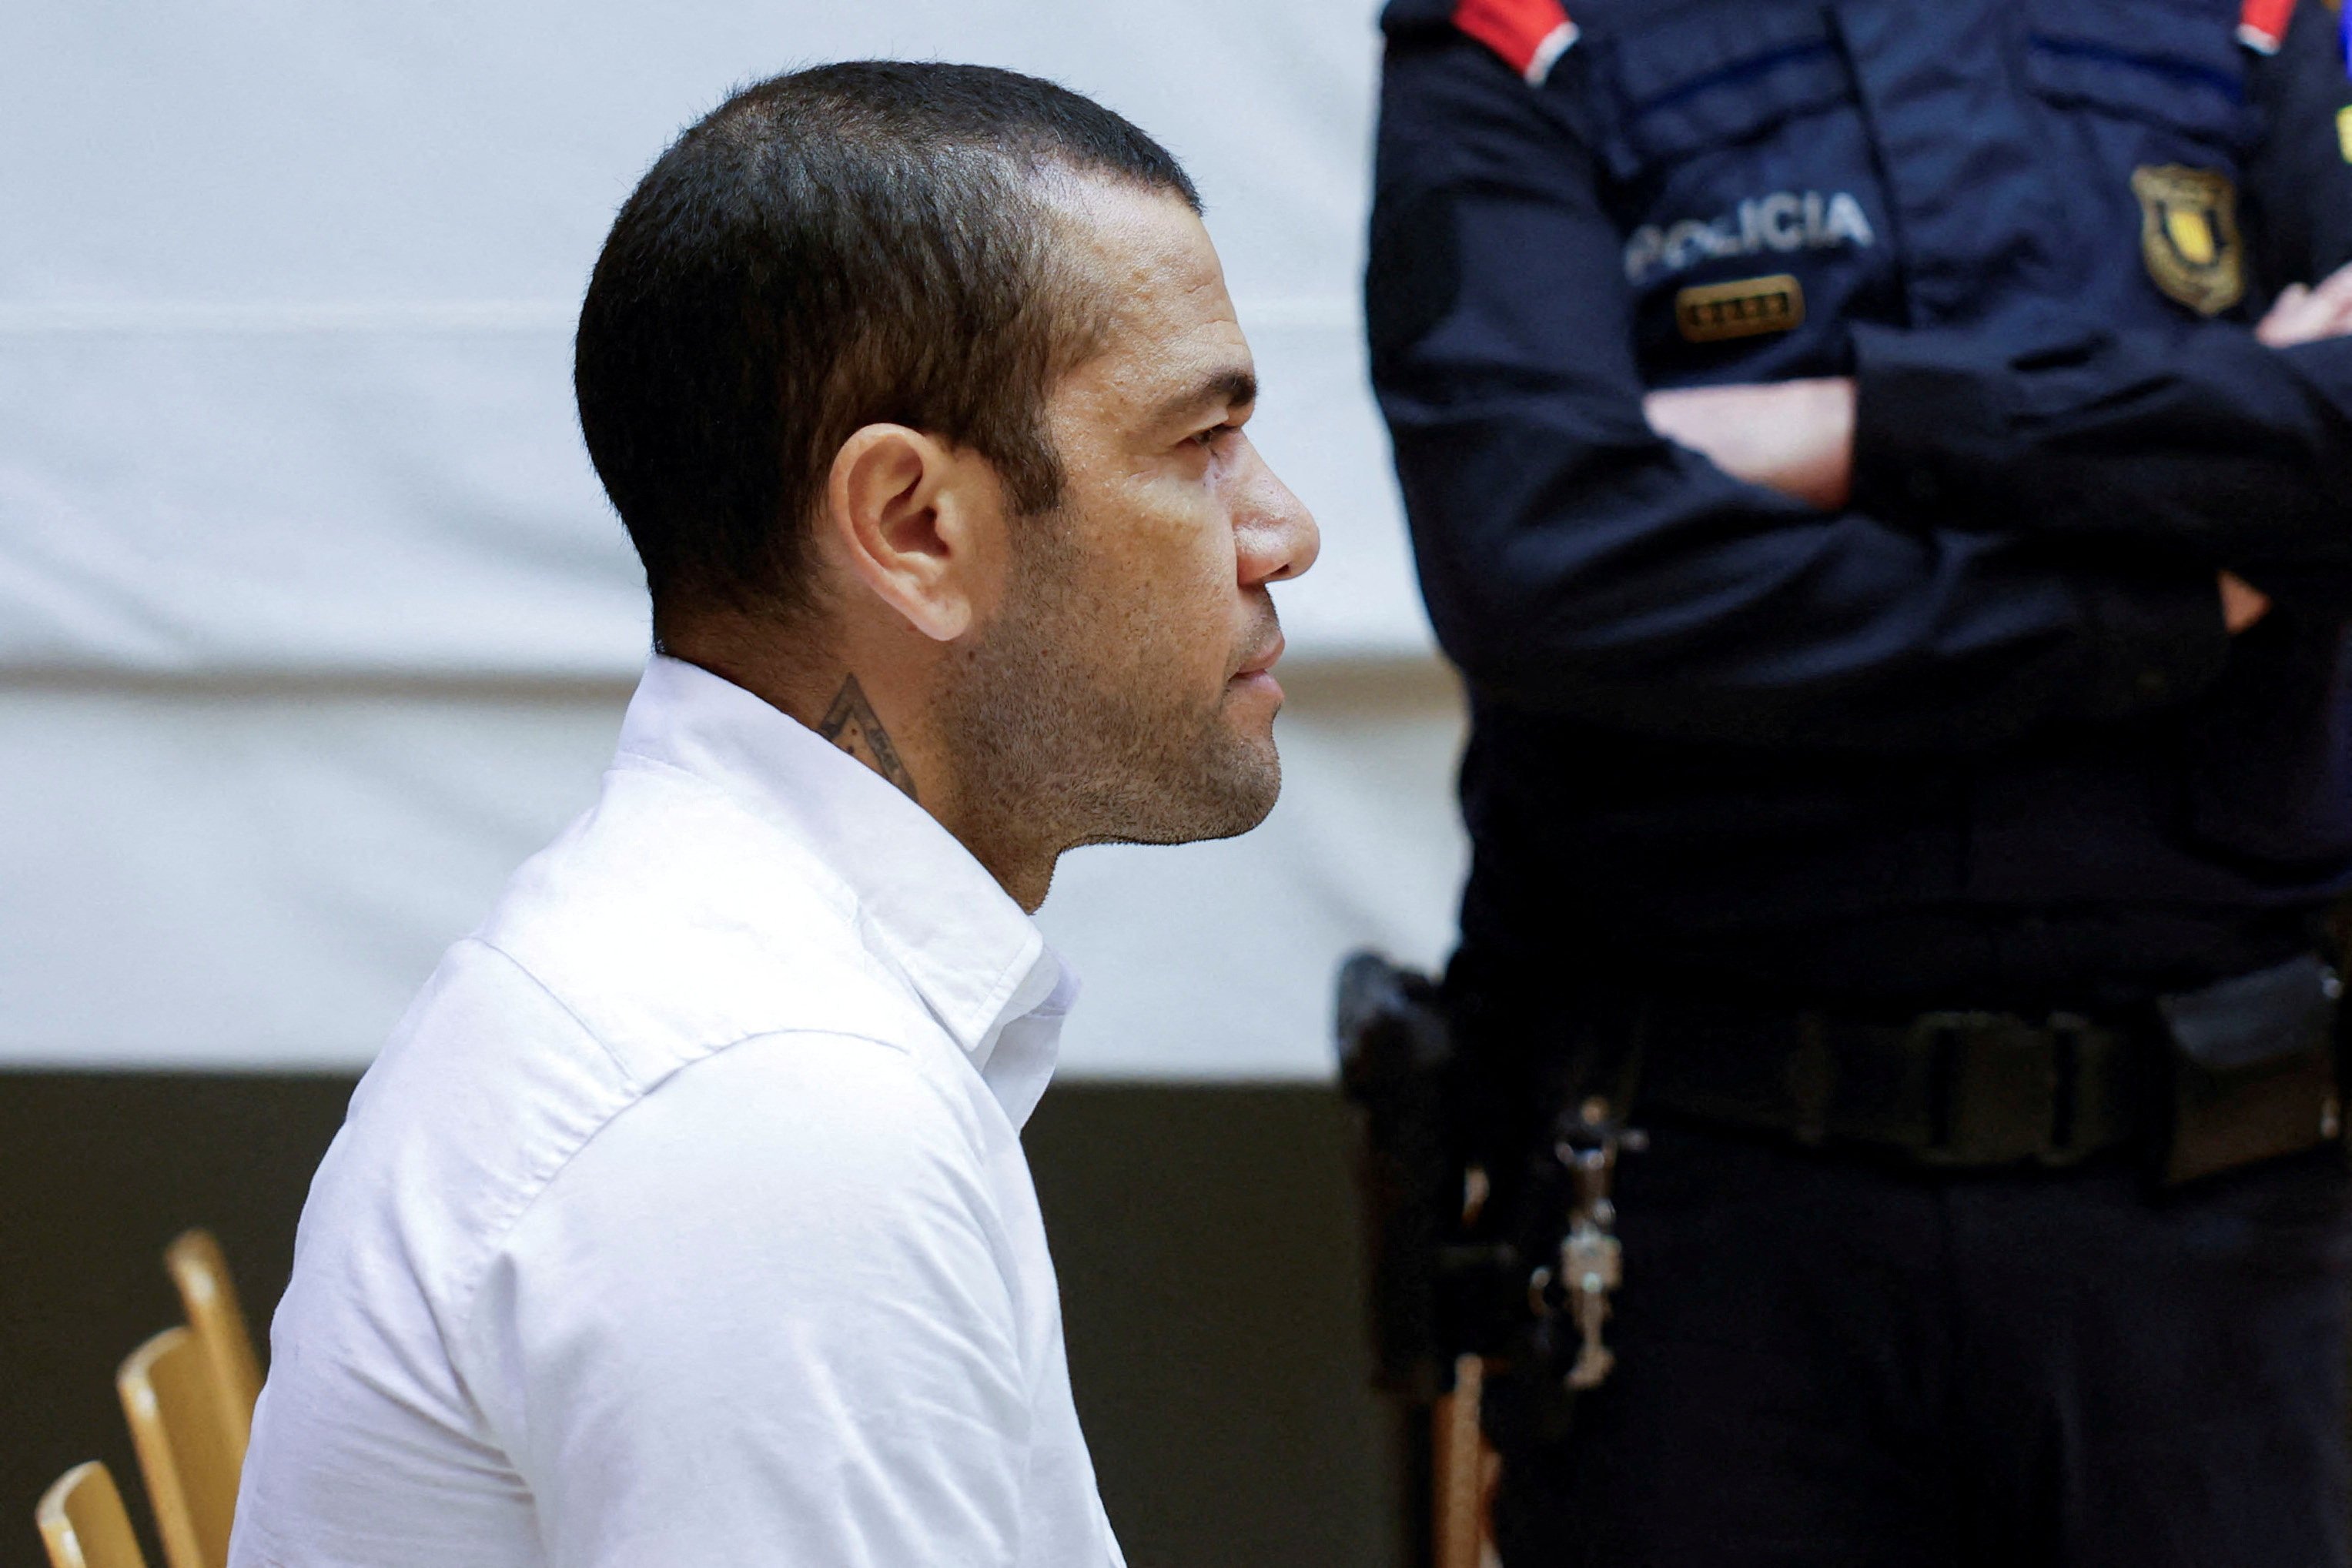 Dani Alves sits in court during his trial in Barcelona. Photo: Reuters